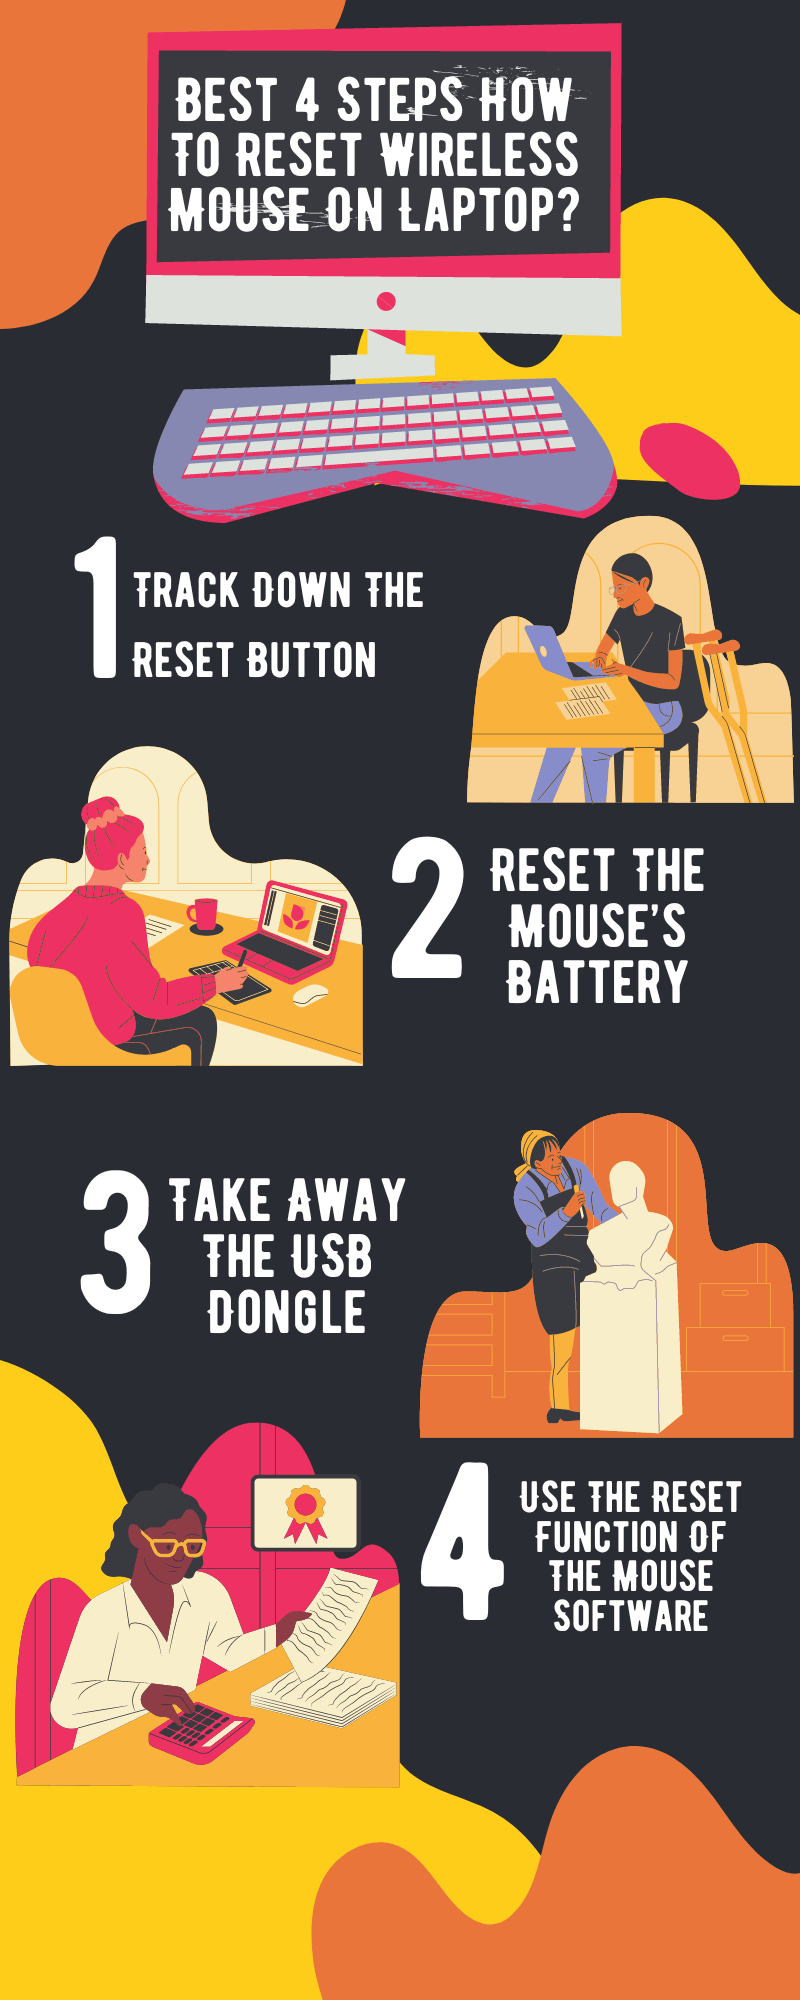 Best-4-Steps-How-To-Reset-Wireless-Mouse-On-Laptop